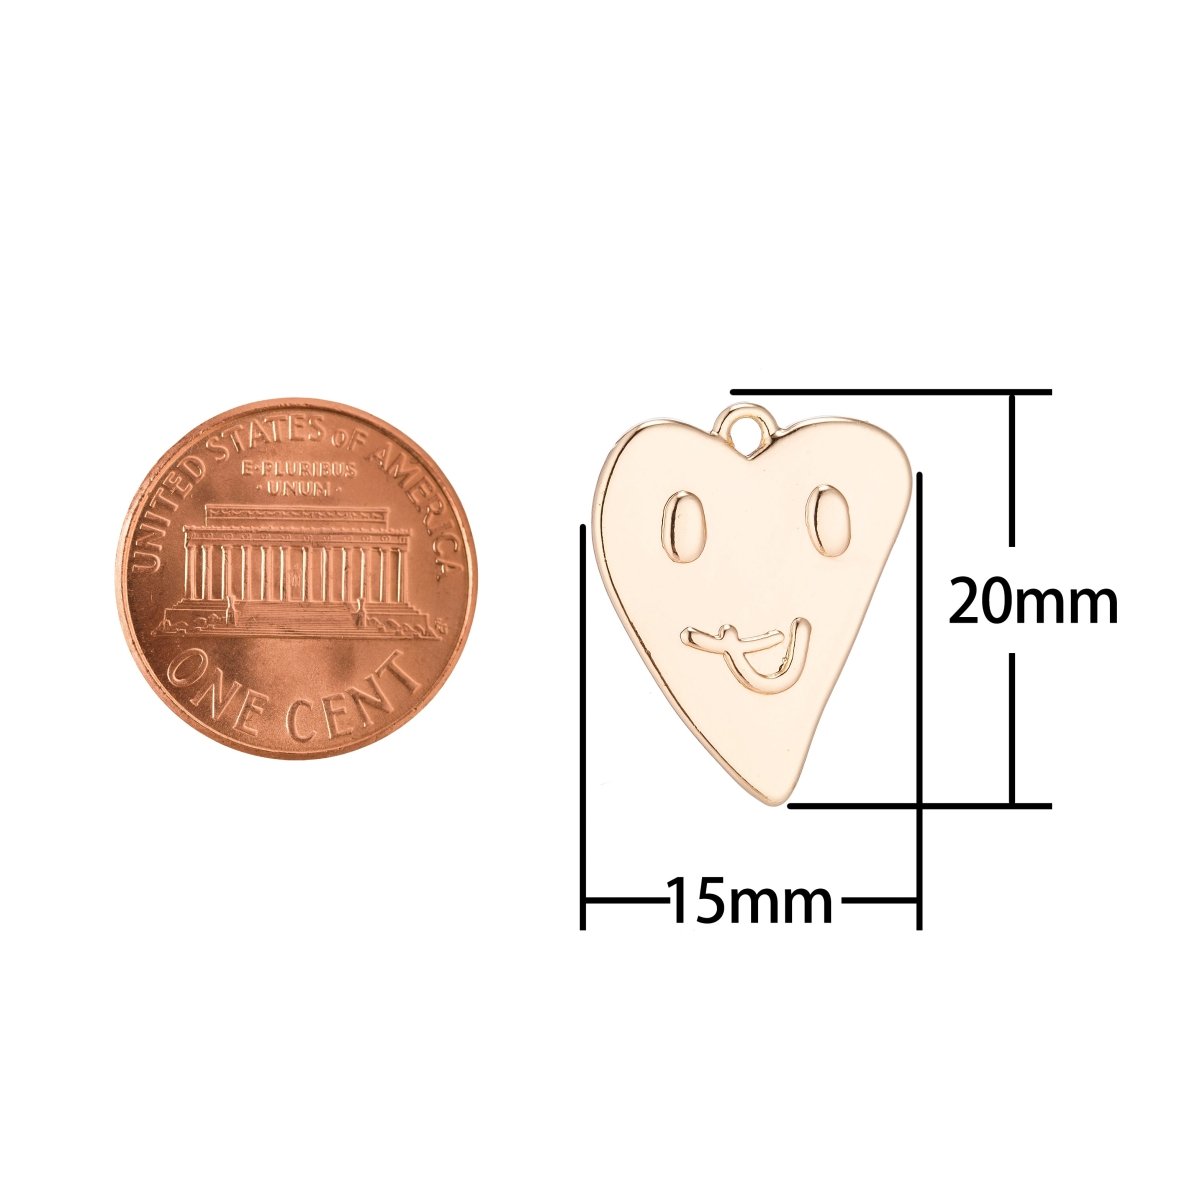 18K Gold Filled Heart shaped emoticon face pendant Coeur Charm for Layer Necklace Earing Jewelry Making Supplies - DLUXCA